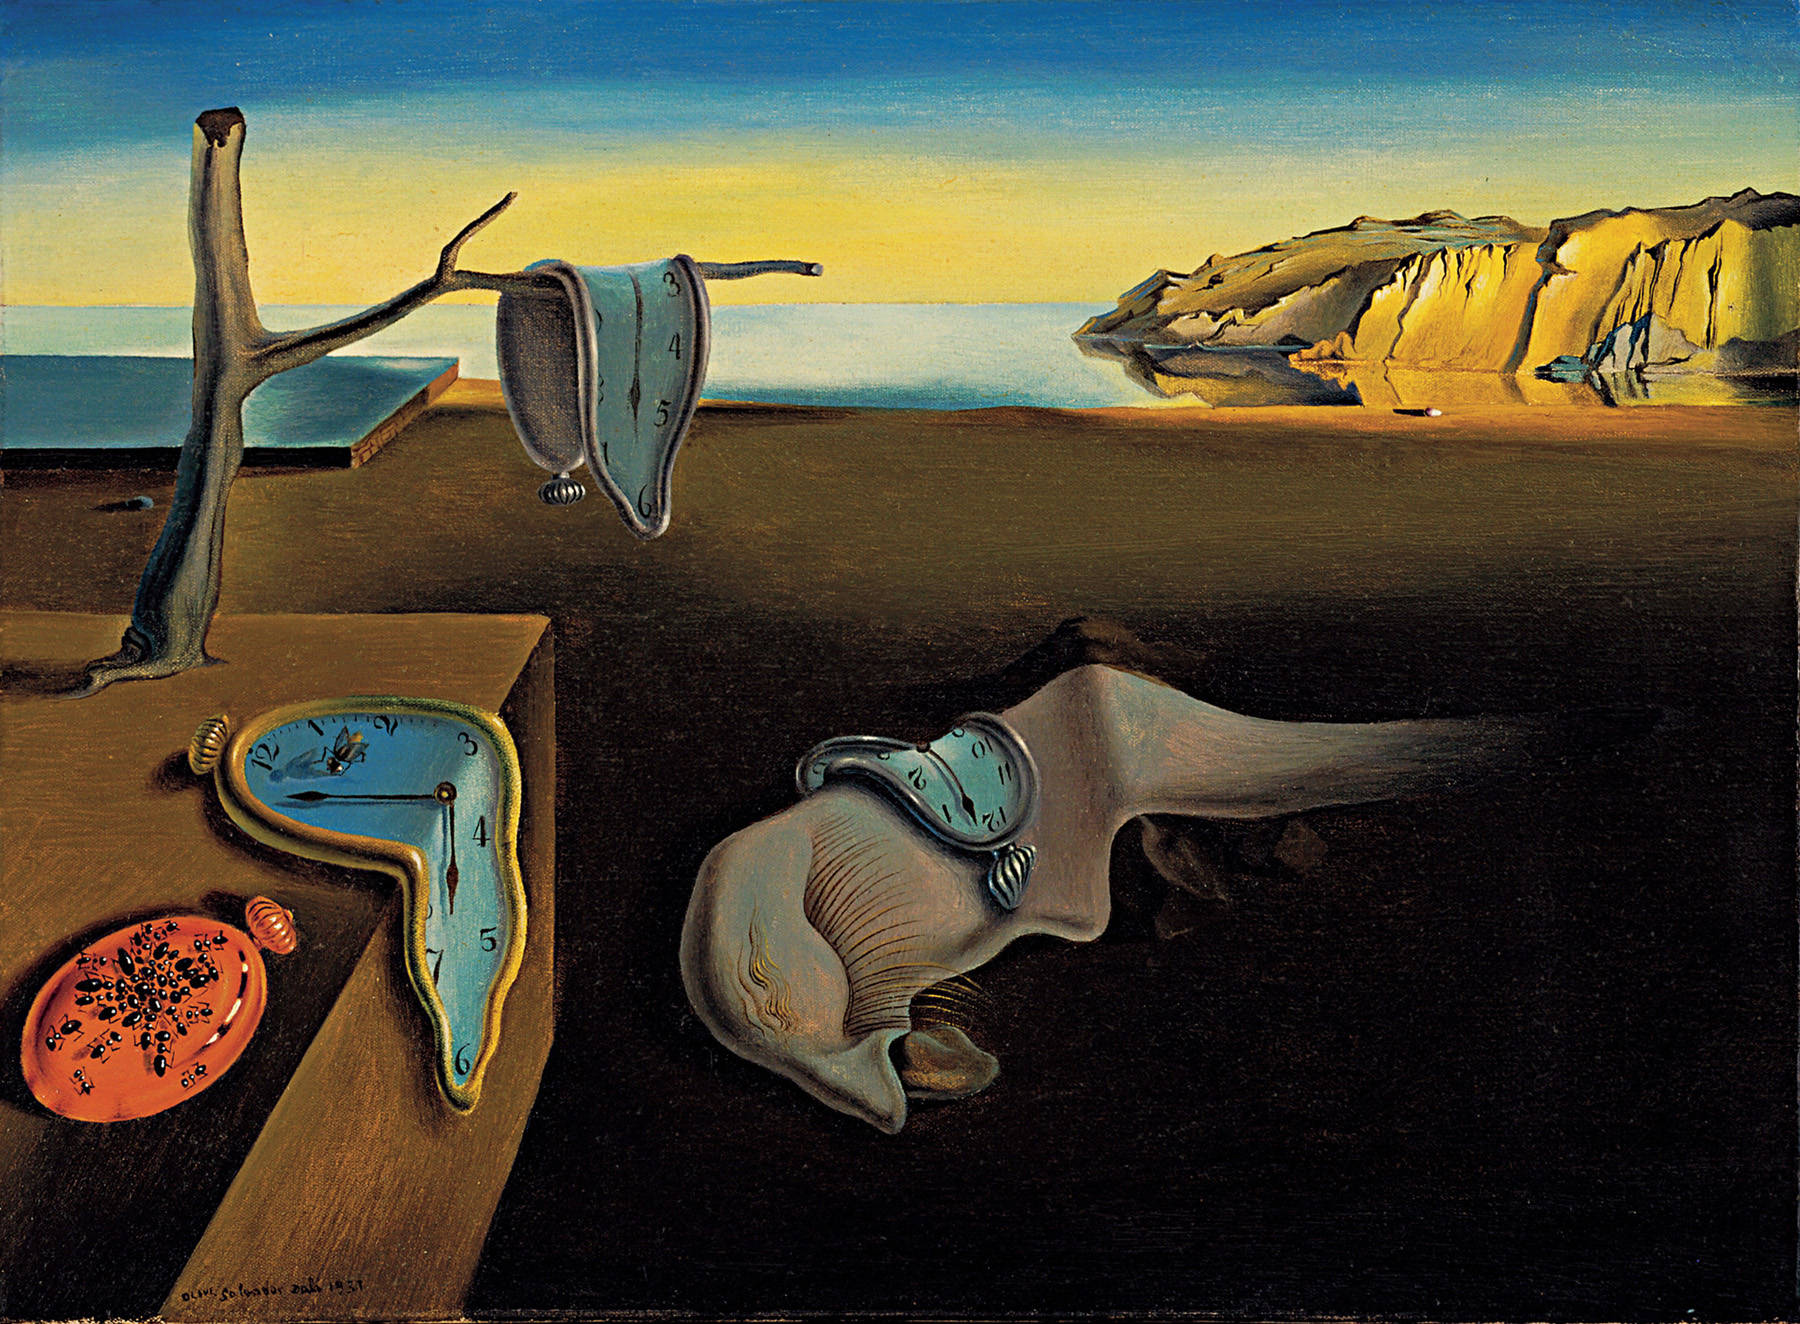 The Persistence of Memory by Salvador Dalí - 1931 - 24  × 33 cm Museum of Modern Art